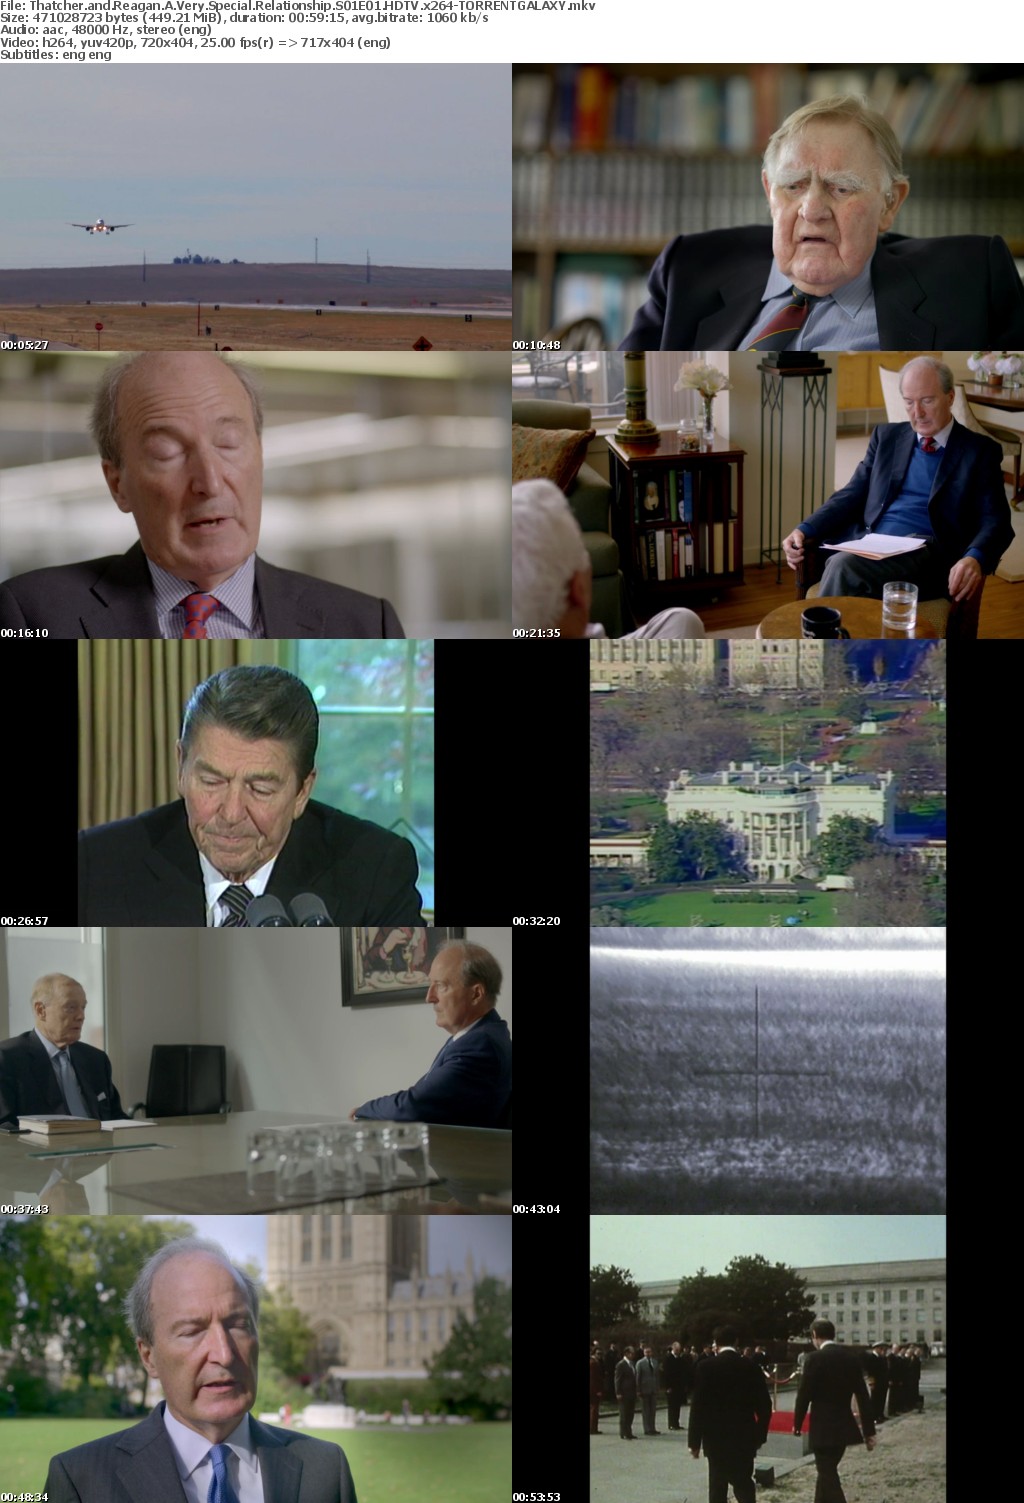 Thatcher and Reagan A Very Special Relationship S01E01 HDTV x264-GALAXY